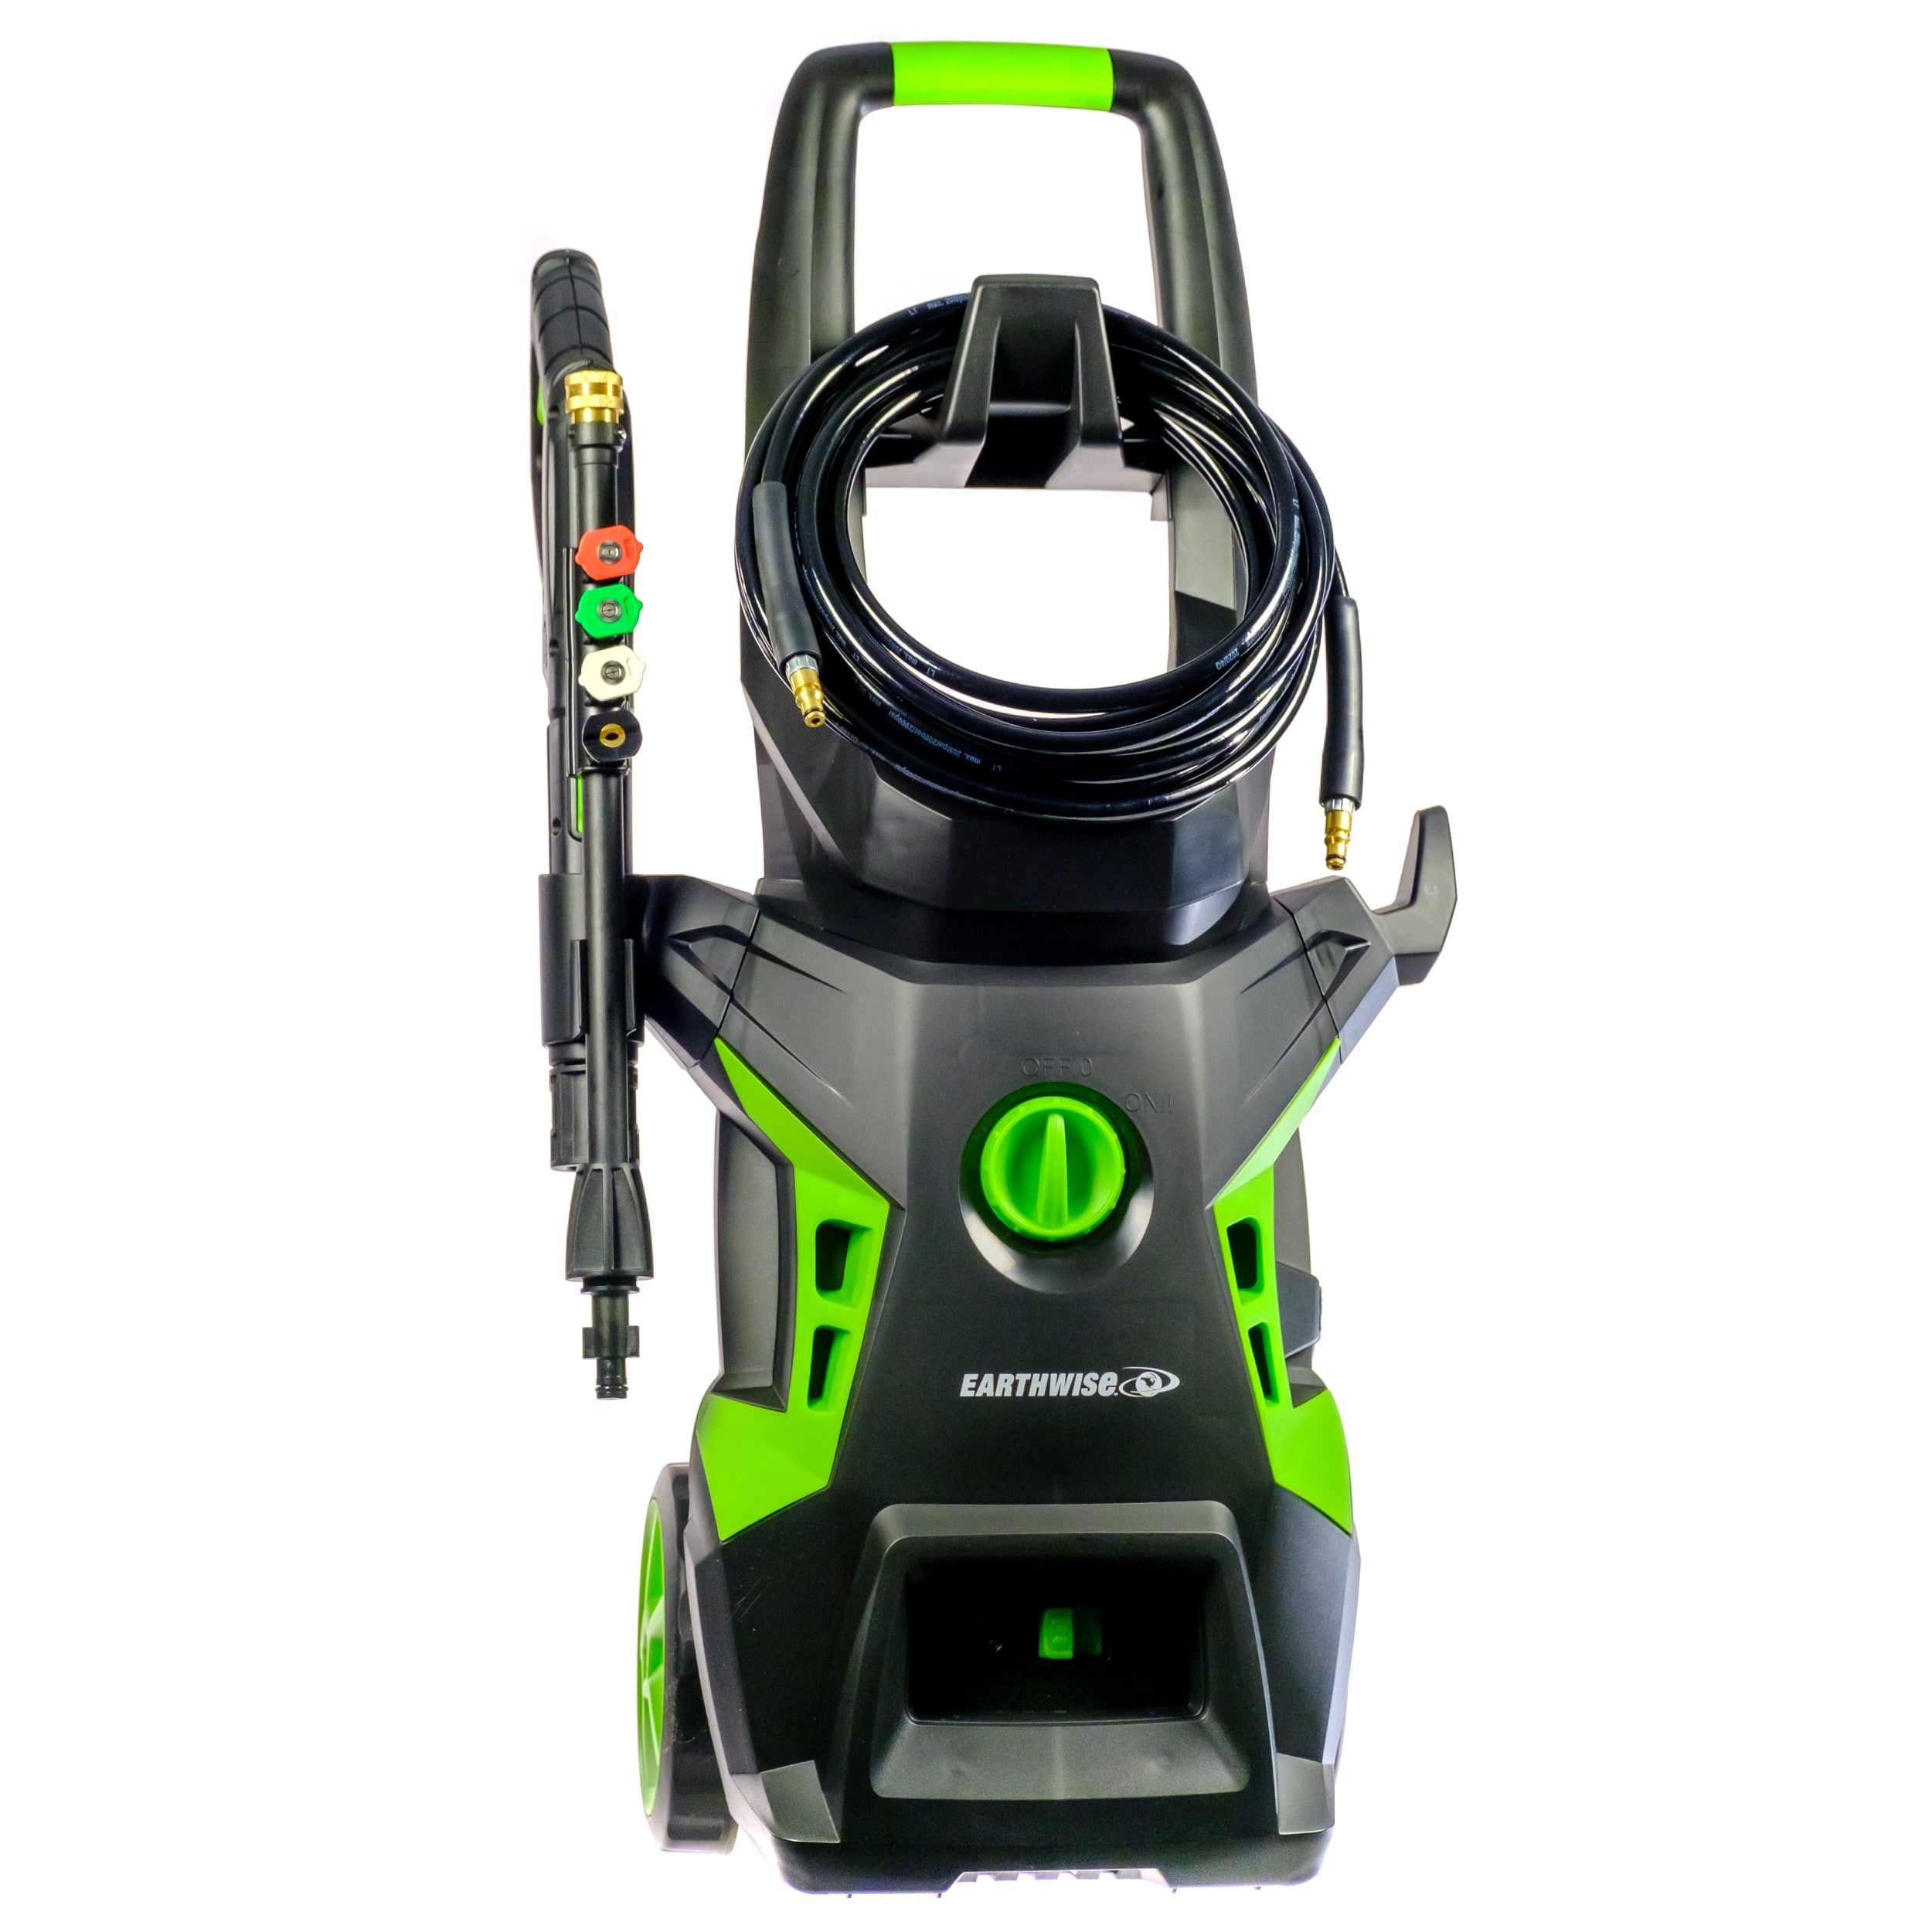 Earthwise Power Tools by ALM 1900 psi Cannister Pressure Washer - Black